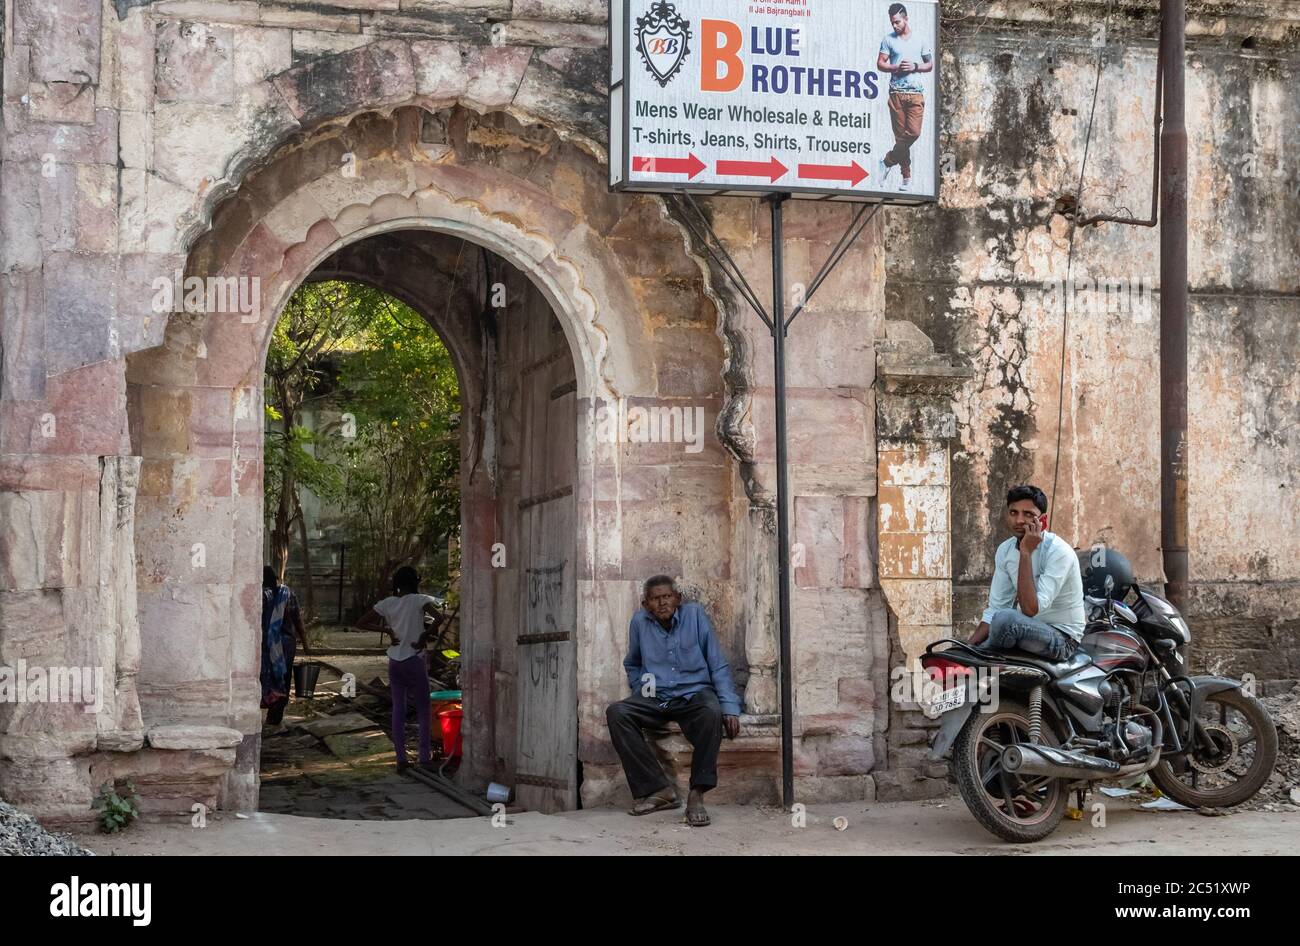 Nagpur, Maharashtra, India - March 2019: Indian men sit beneath the old arches of an ancient stone gateway in the old city of Nagpur. Stock Photo